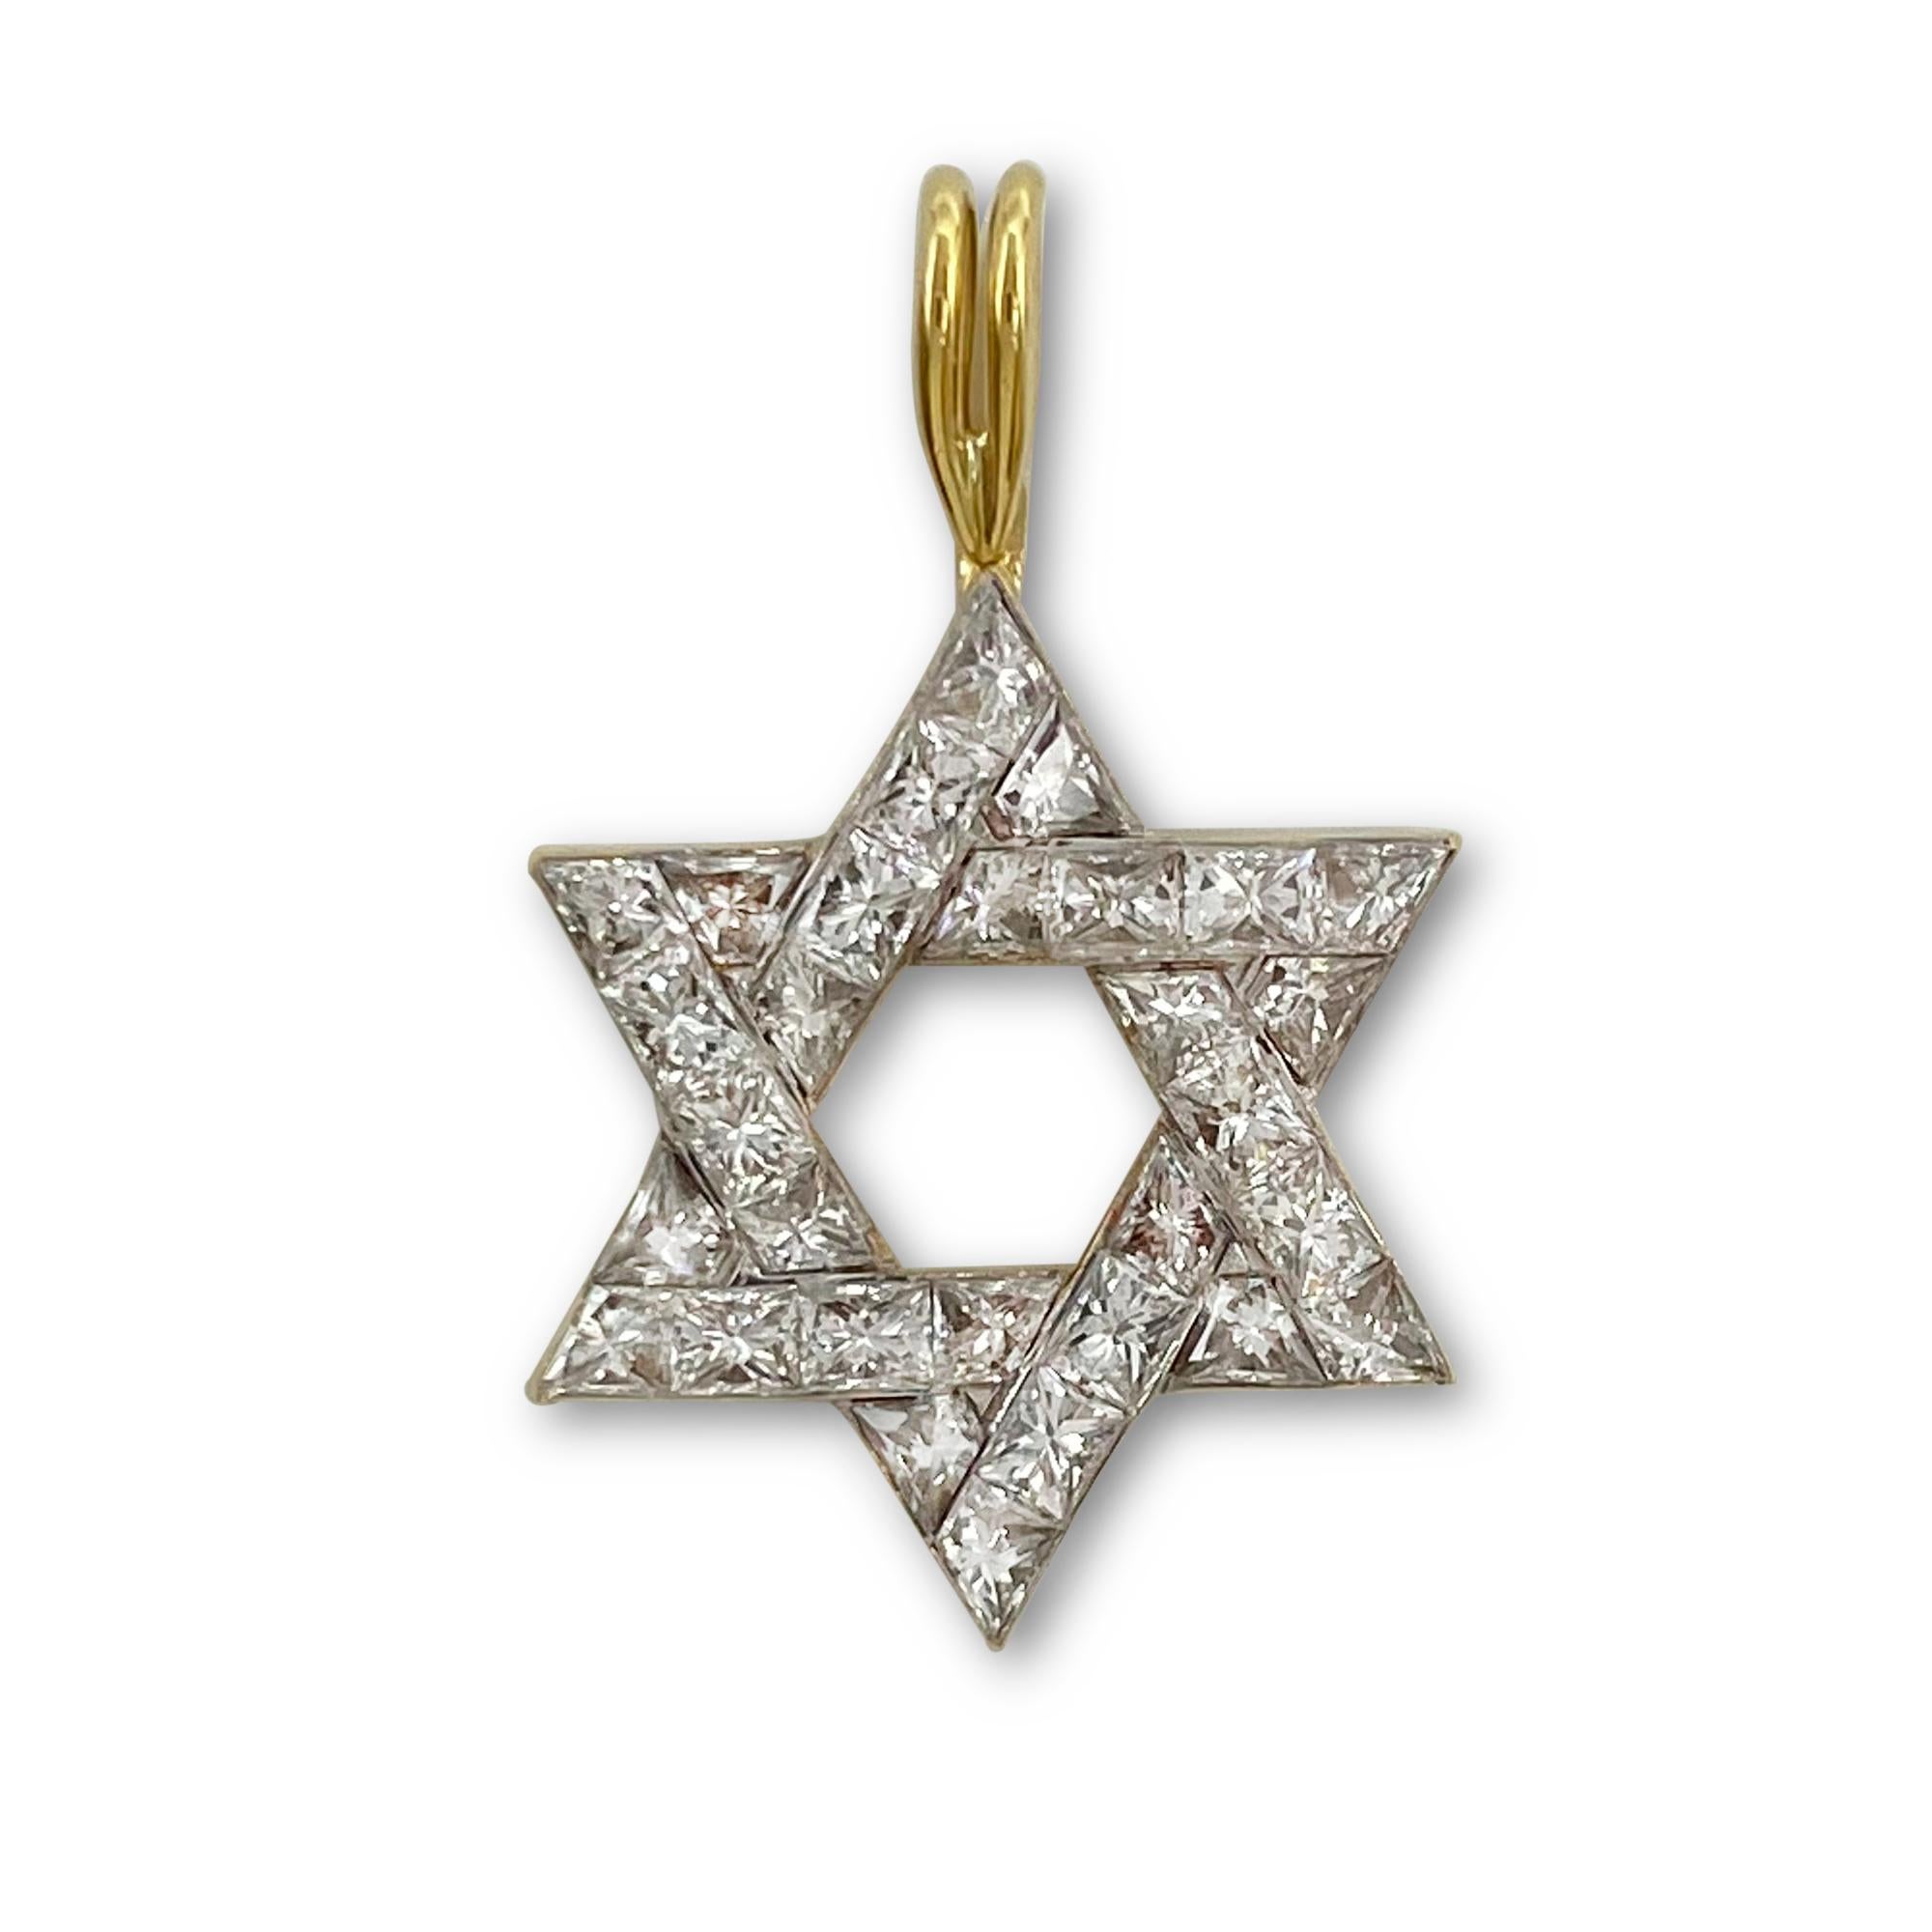 Authentic Cartier pendant crafted in 18 karat yellow gold.  The Star of David motif is set with approximately 1.11 carats of glittering princess cut diamonds, D-F color, VS clarity.  The pendant measures 0.68 inches x 0.68.  Signed Cartier with